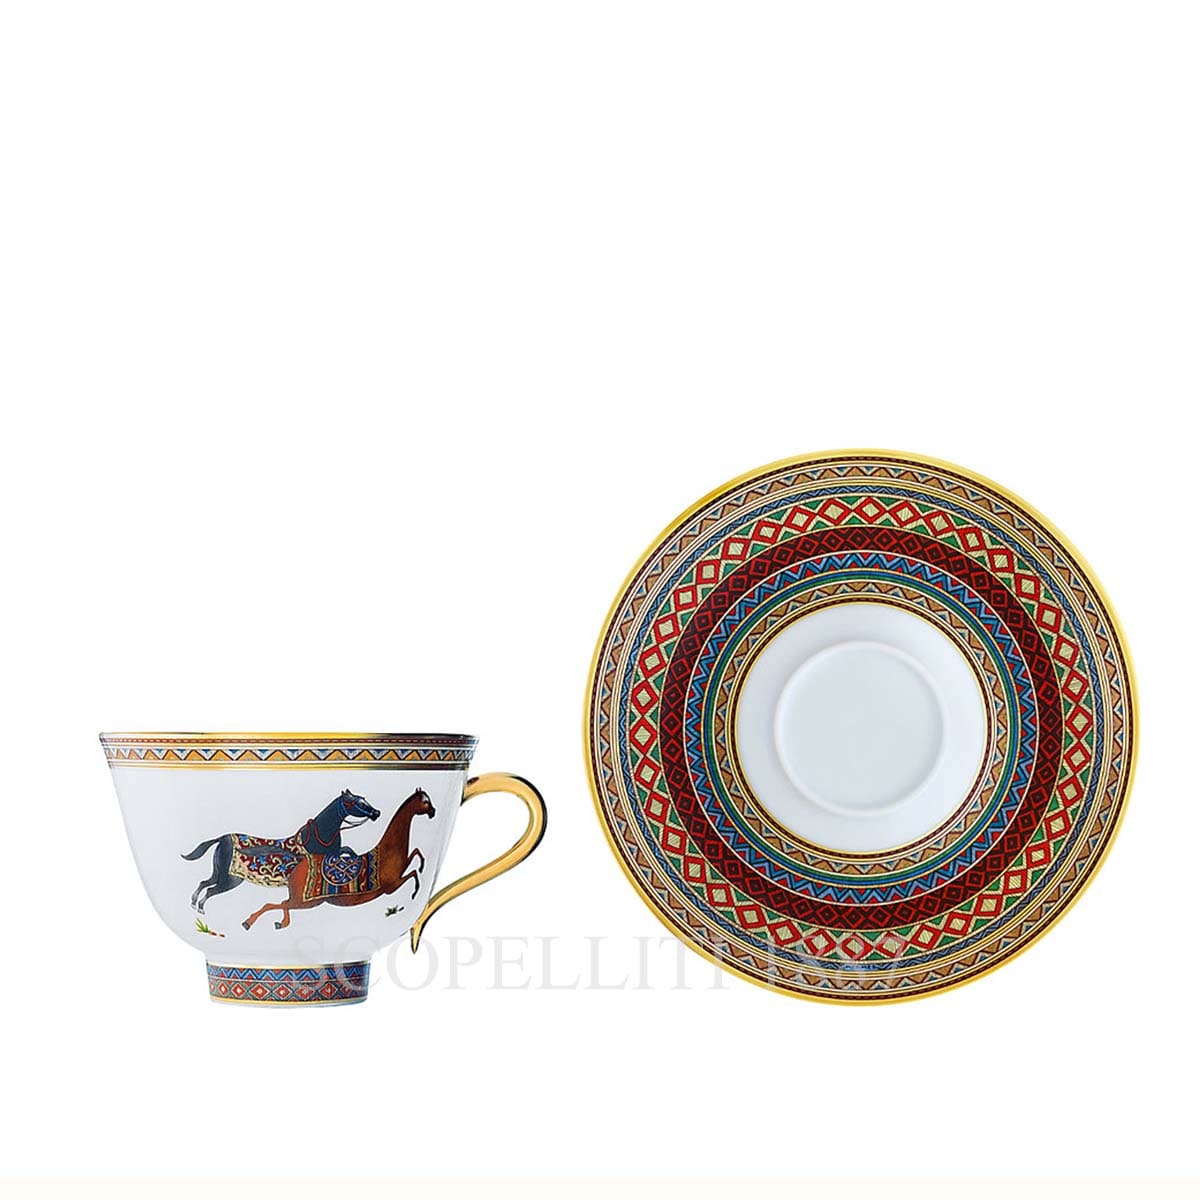 Hermes Set of 2 Tea Cups with Saucers n°1 Cheval d'Orient - SCOPELLITI 1887